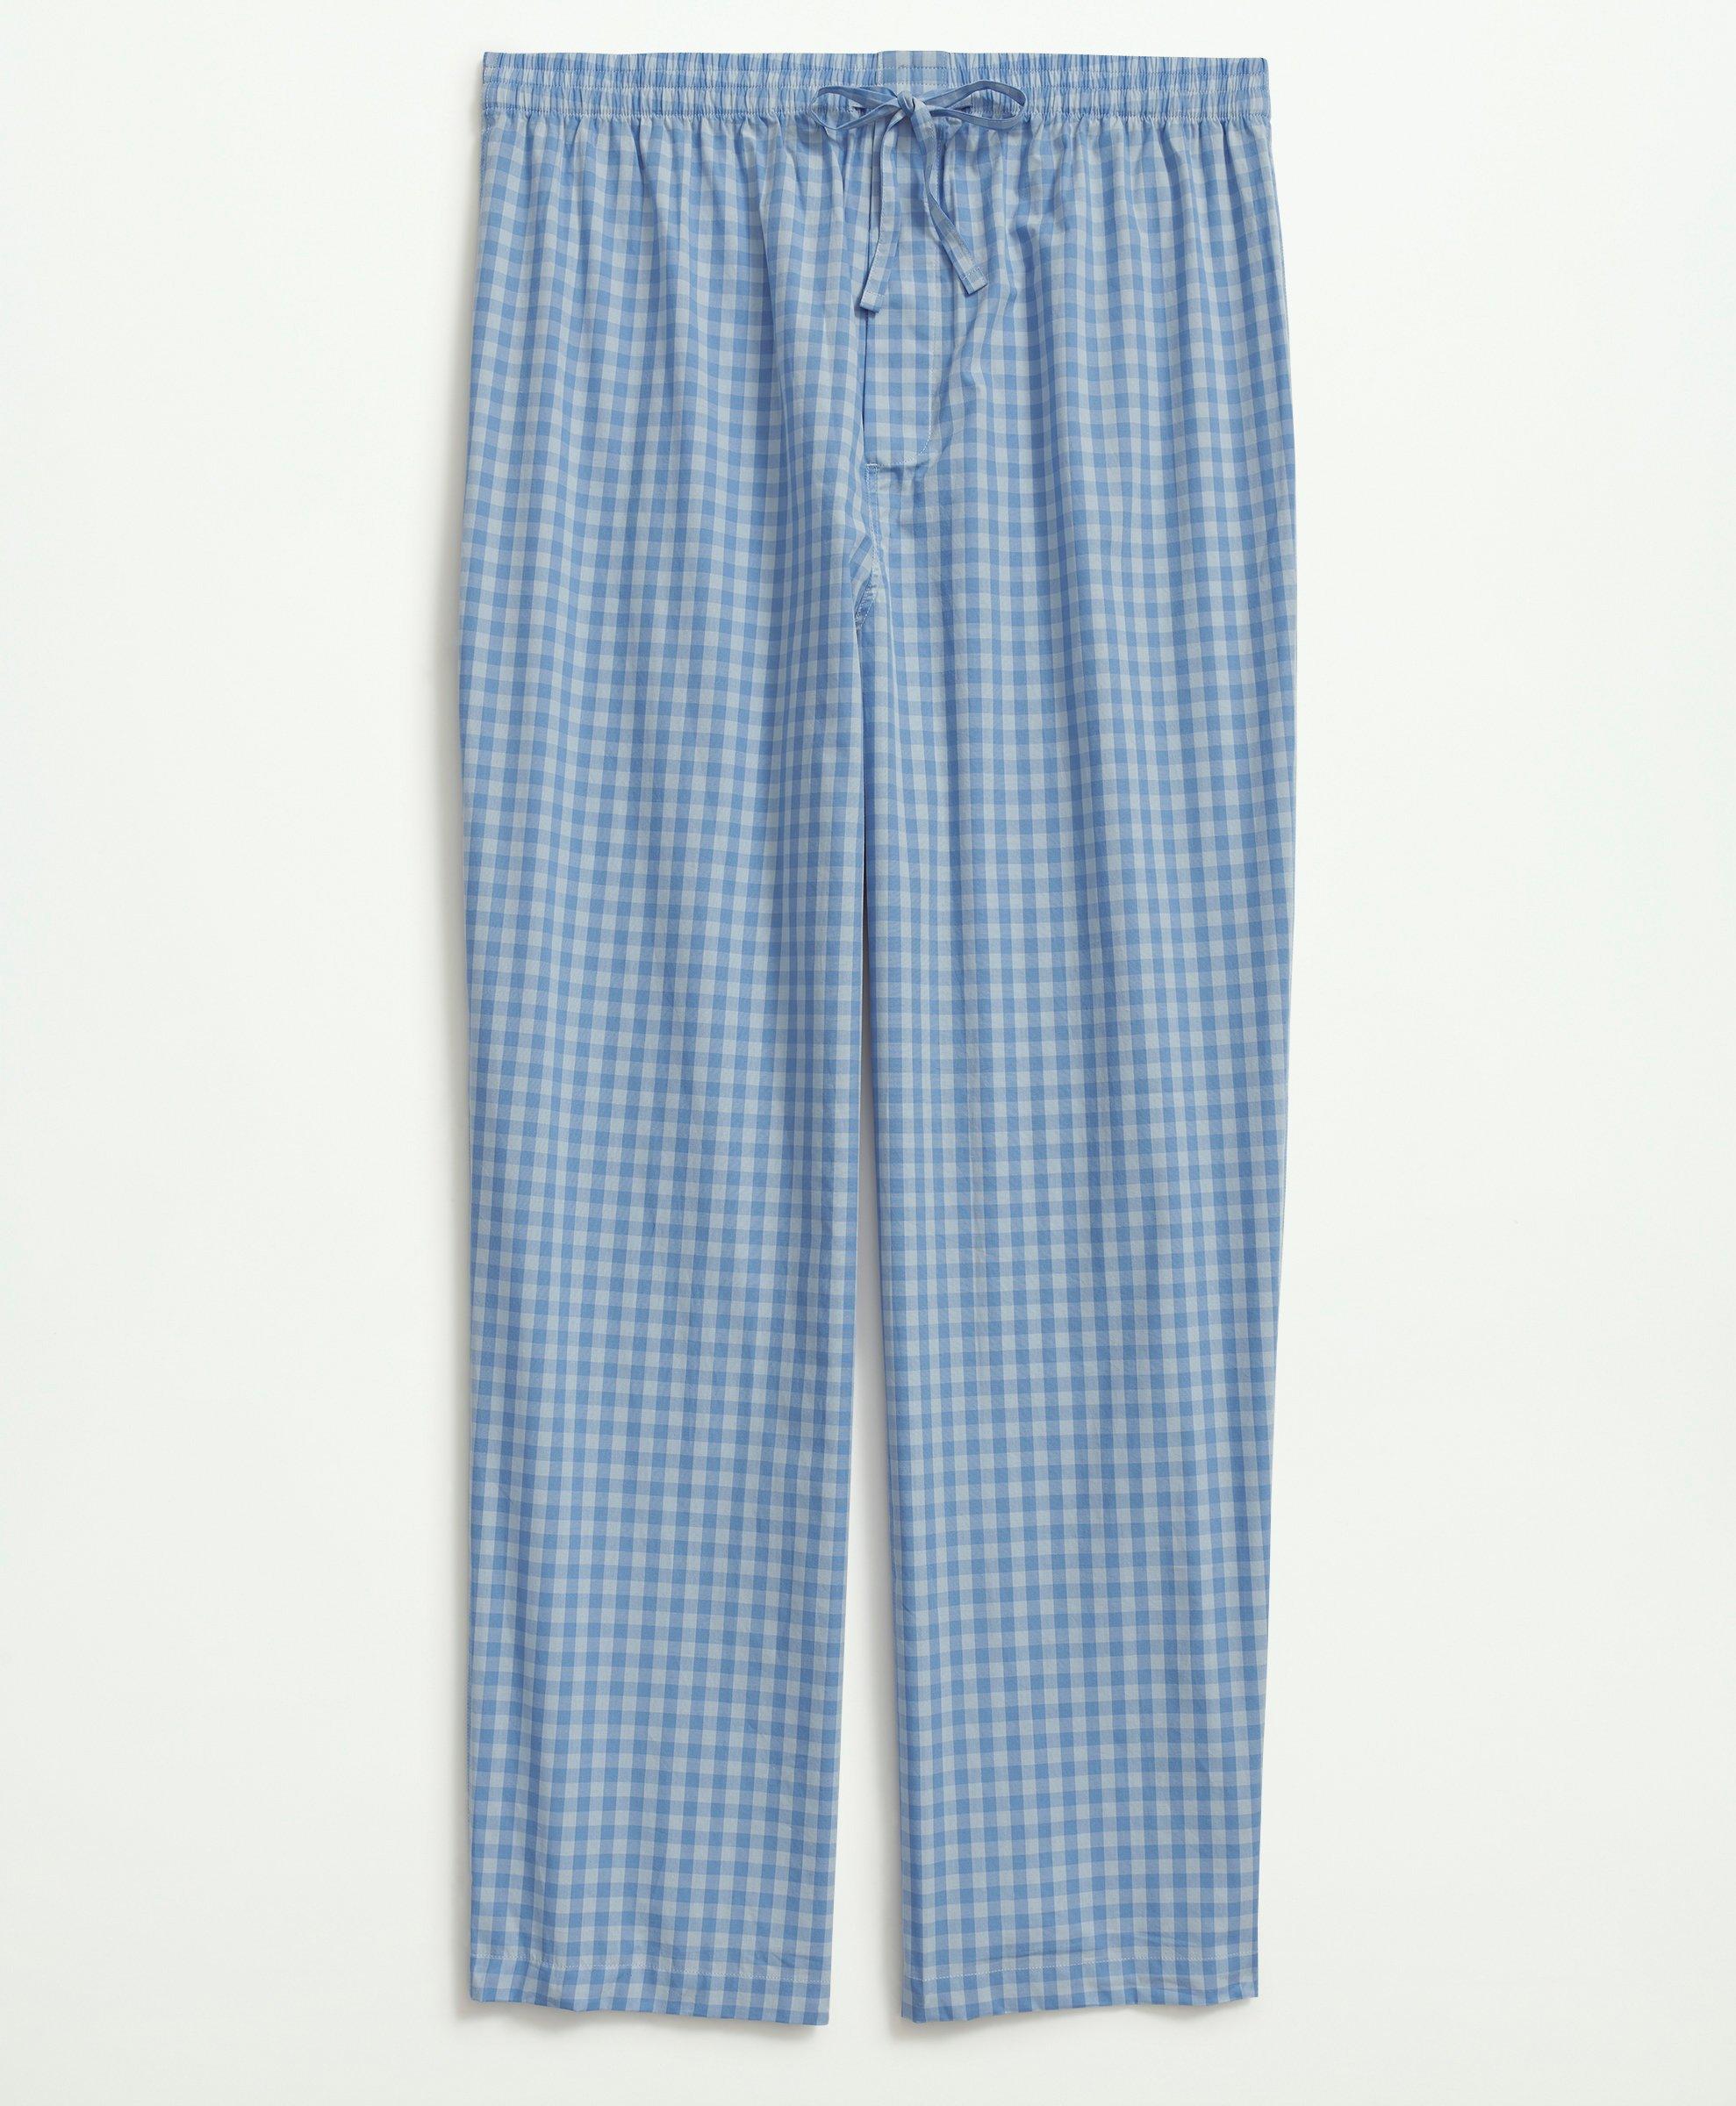 https://cdn.media.amplience.net/i/brooksbrothers/MN00444_CHAMBRAY-BLUE_5?$large$&fmt=auto